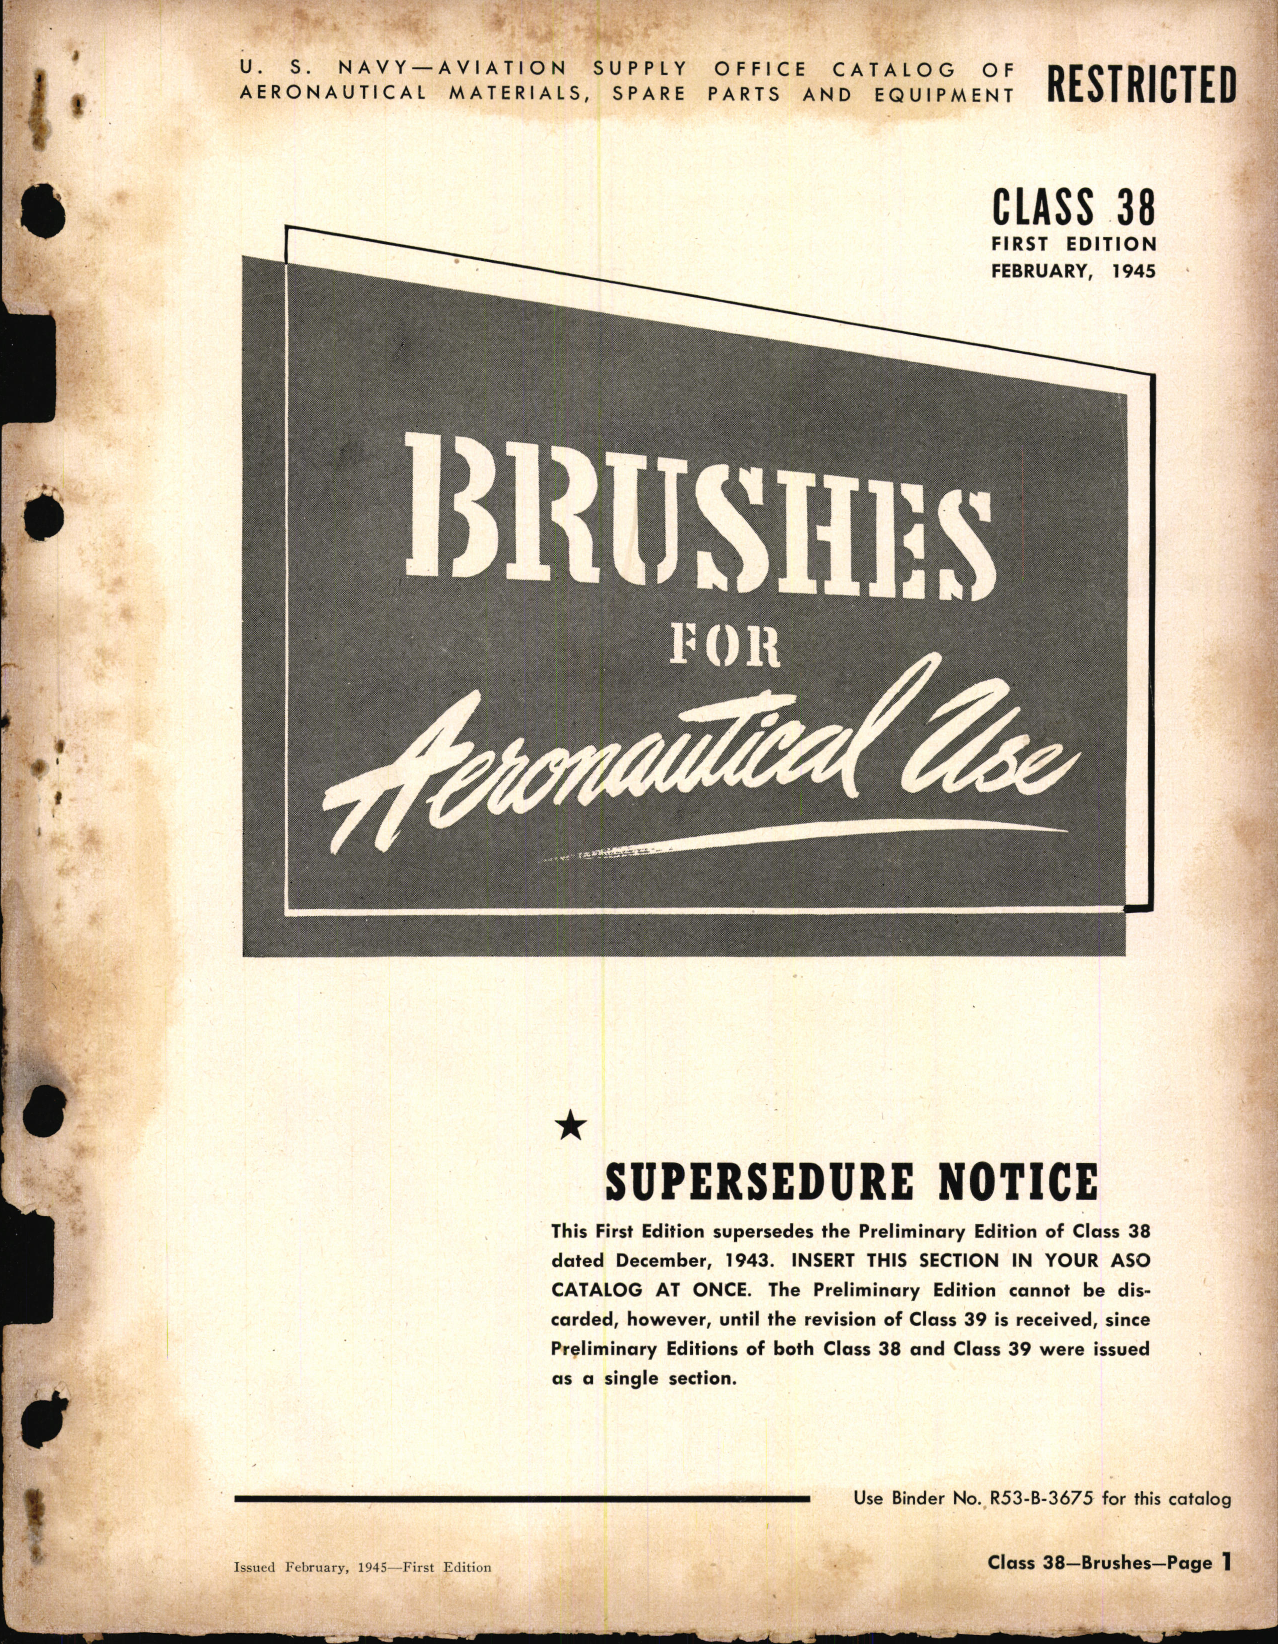 Sample page 1 from AirCorps Library document: Brushes for Aeronautical Use